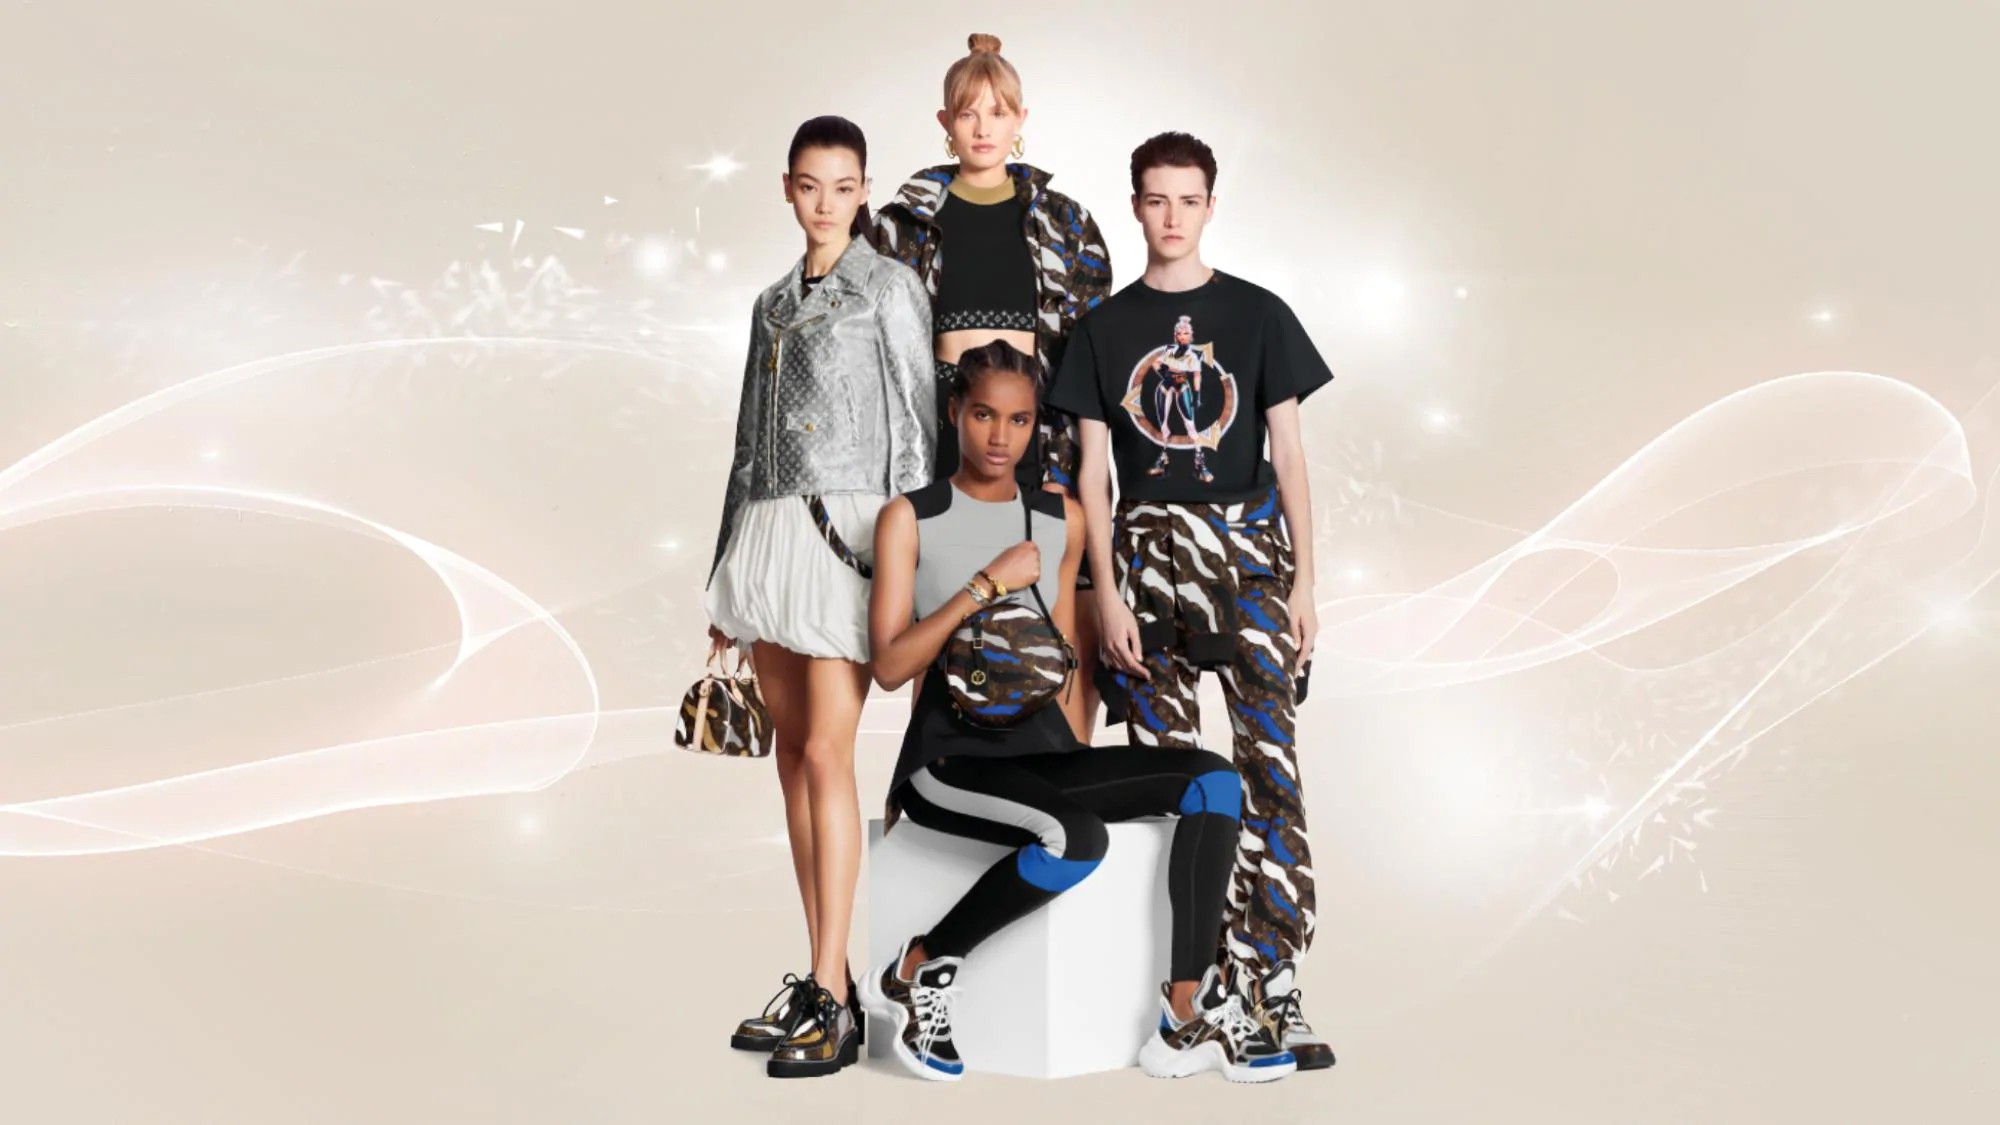 Louis Vuitton's New Capsule with League of Legends Brings French